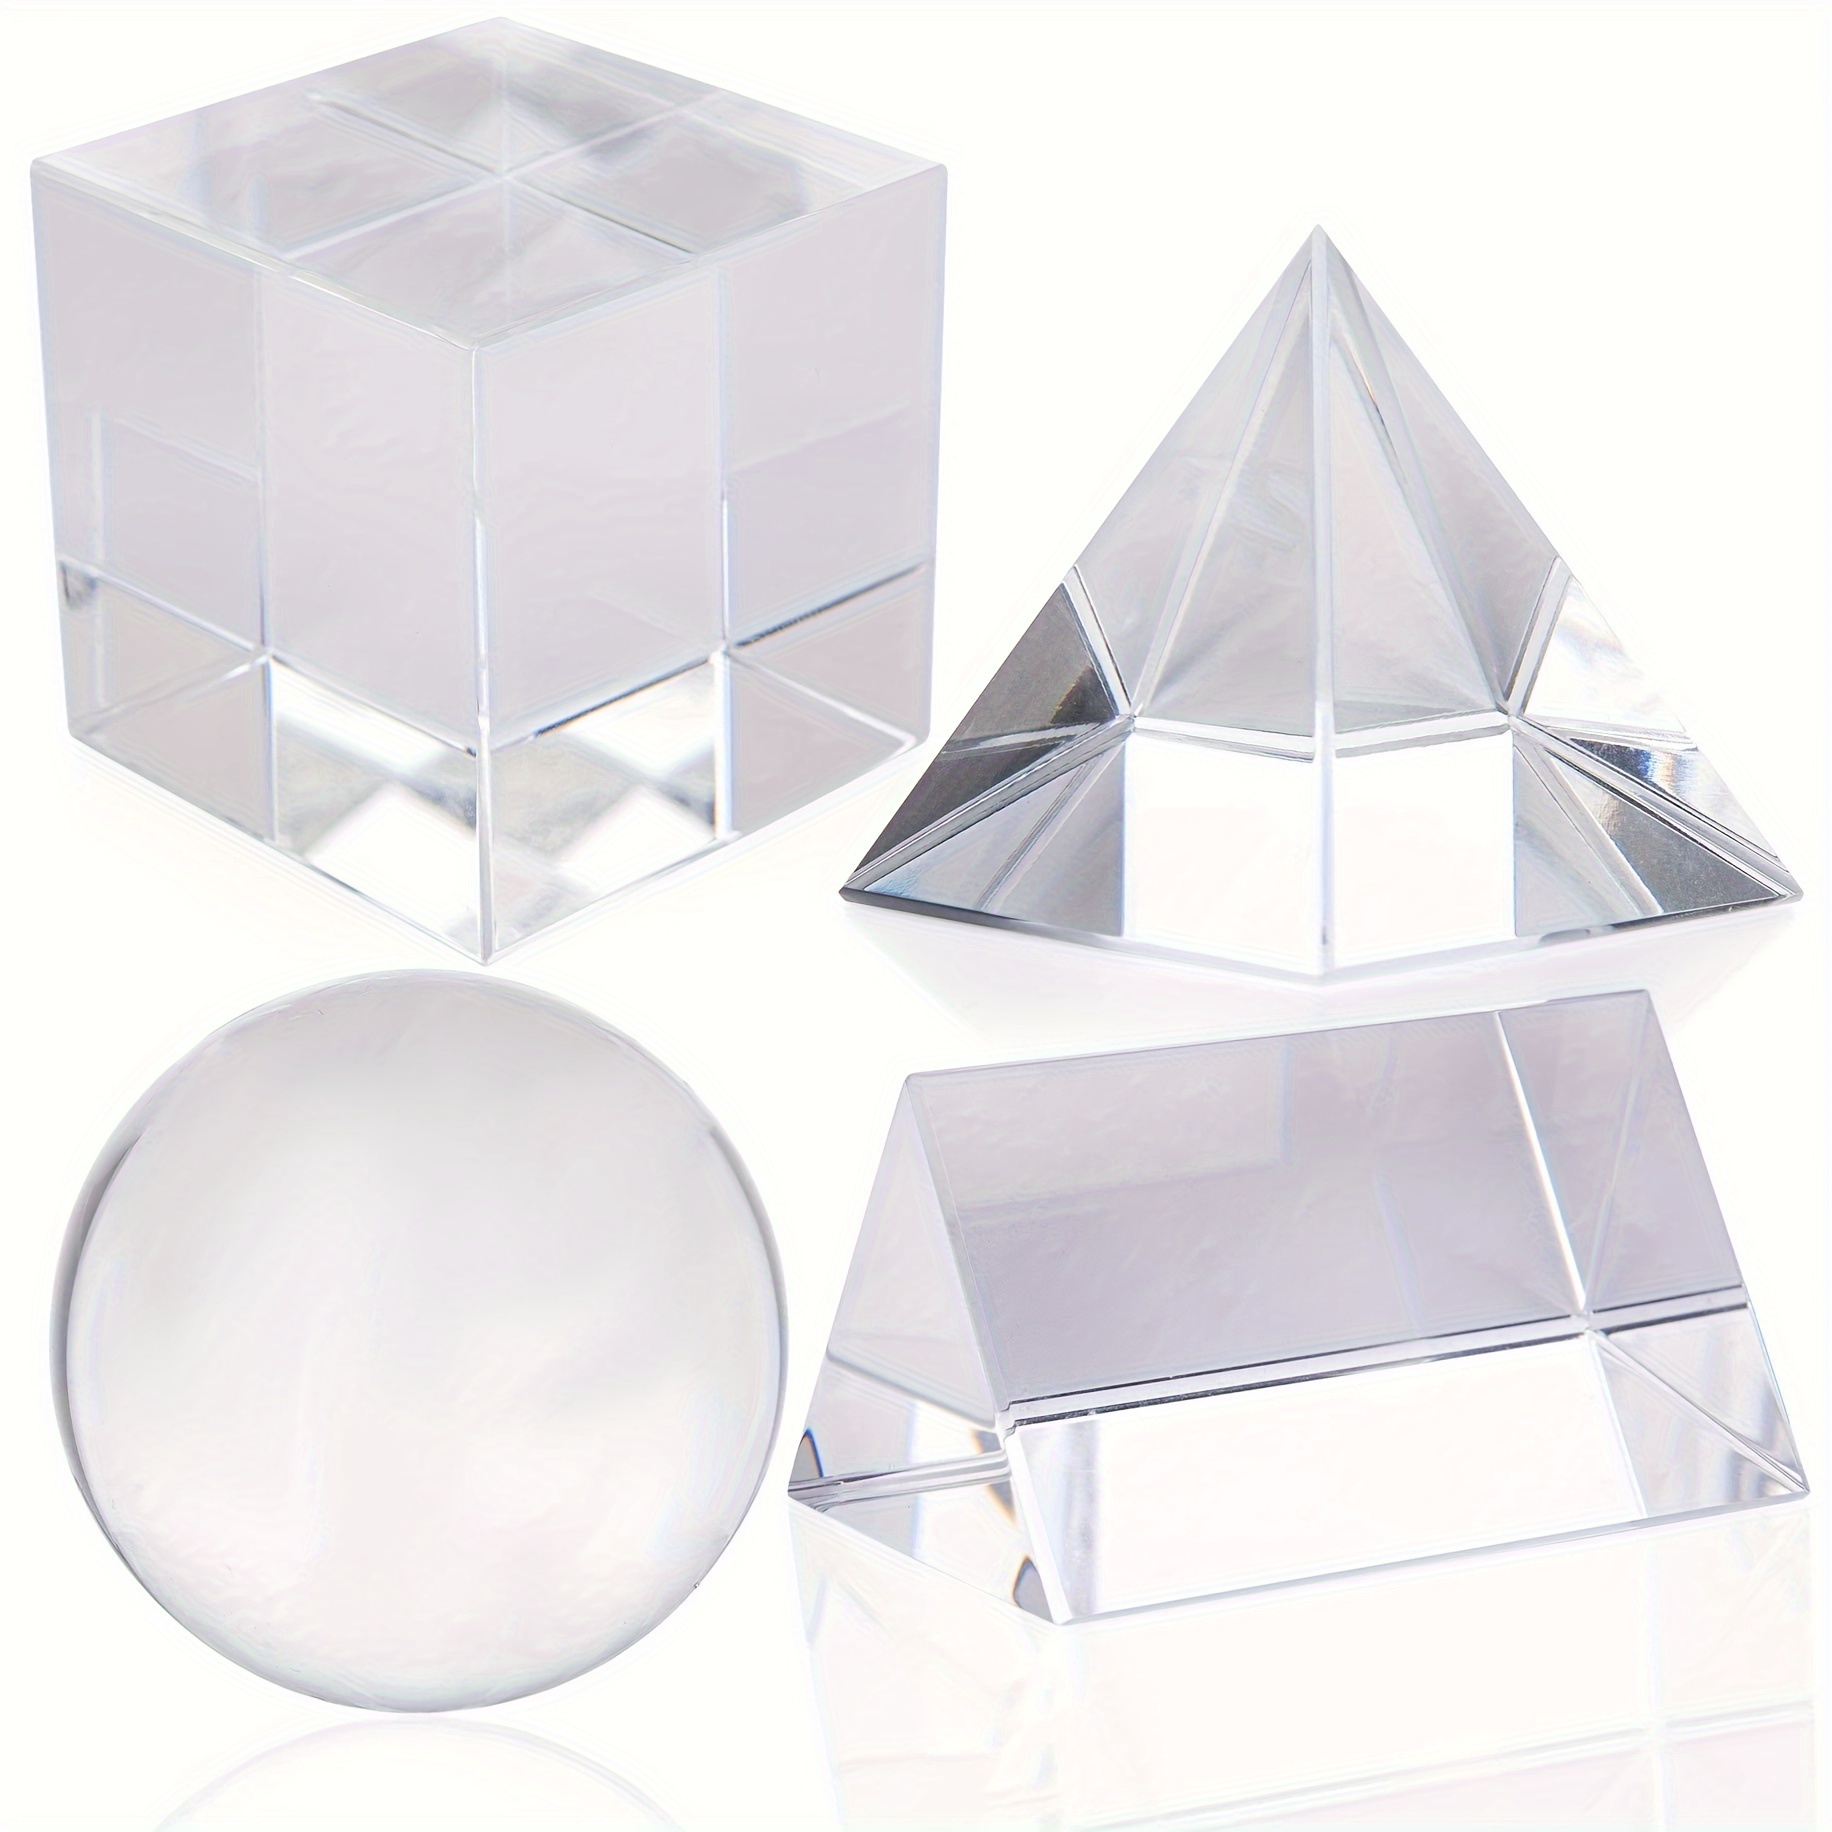 

4pcs K9 Optical Crystal Photography Prism Set, Including 50mm Crystal Ball, 50mm Crystal Cube, 50mm Triangle Prism, 50mm Optical Pyramid, Gift Box And Wipe Cloth, For Teaching, Playing, Photography